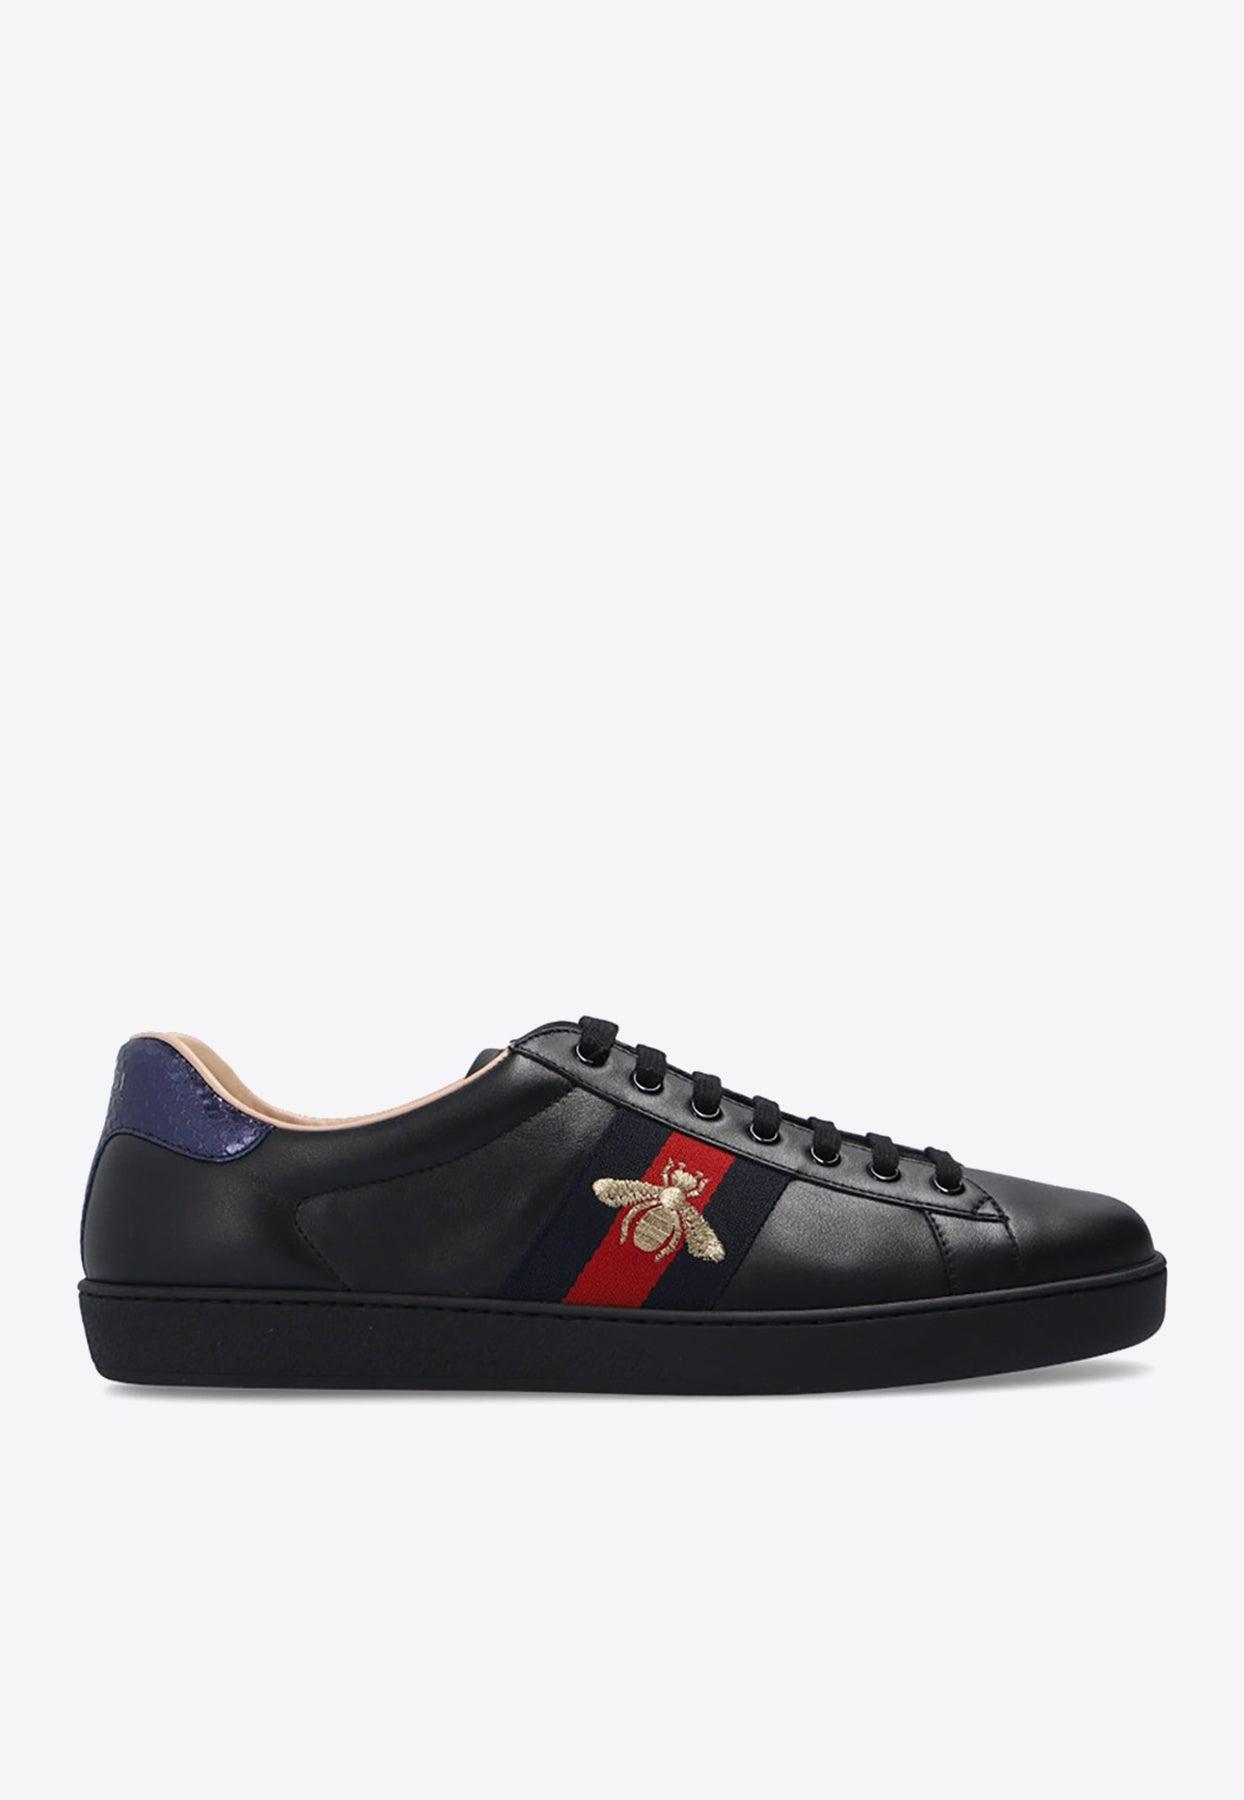 Men's Ace Sneaker Black Leather With Bee